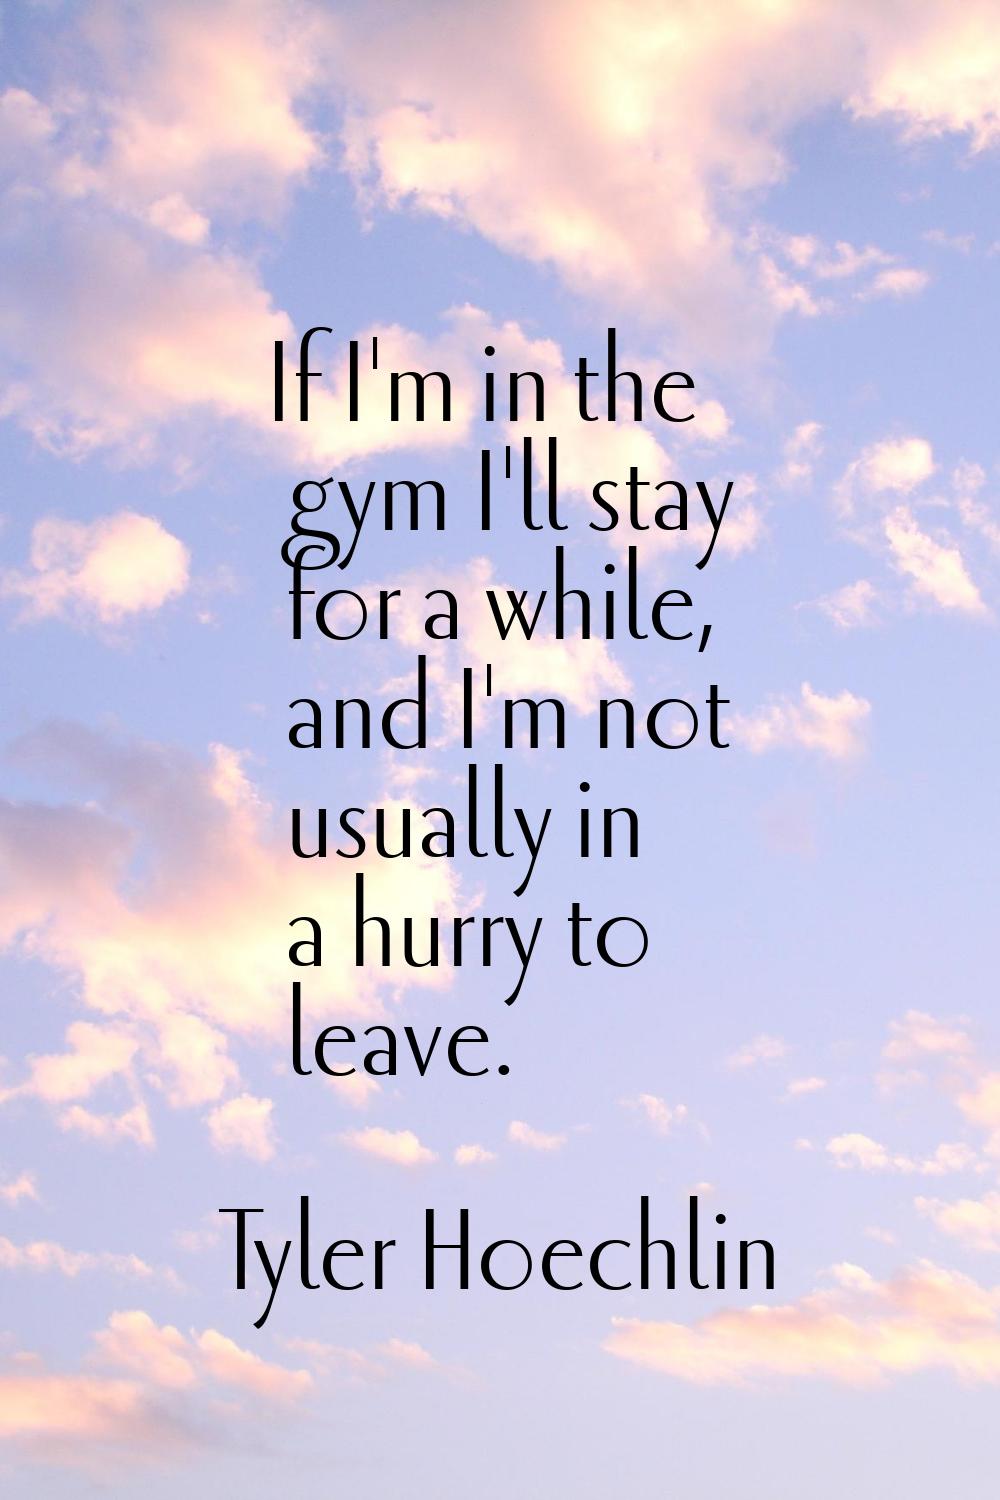 If I'm in the gym I'll stay for a while, and I'm not usually in a hurry to leave.